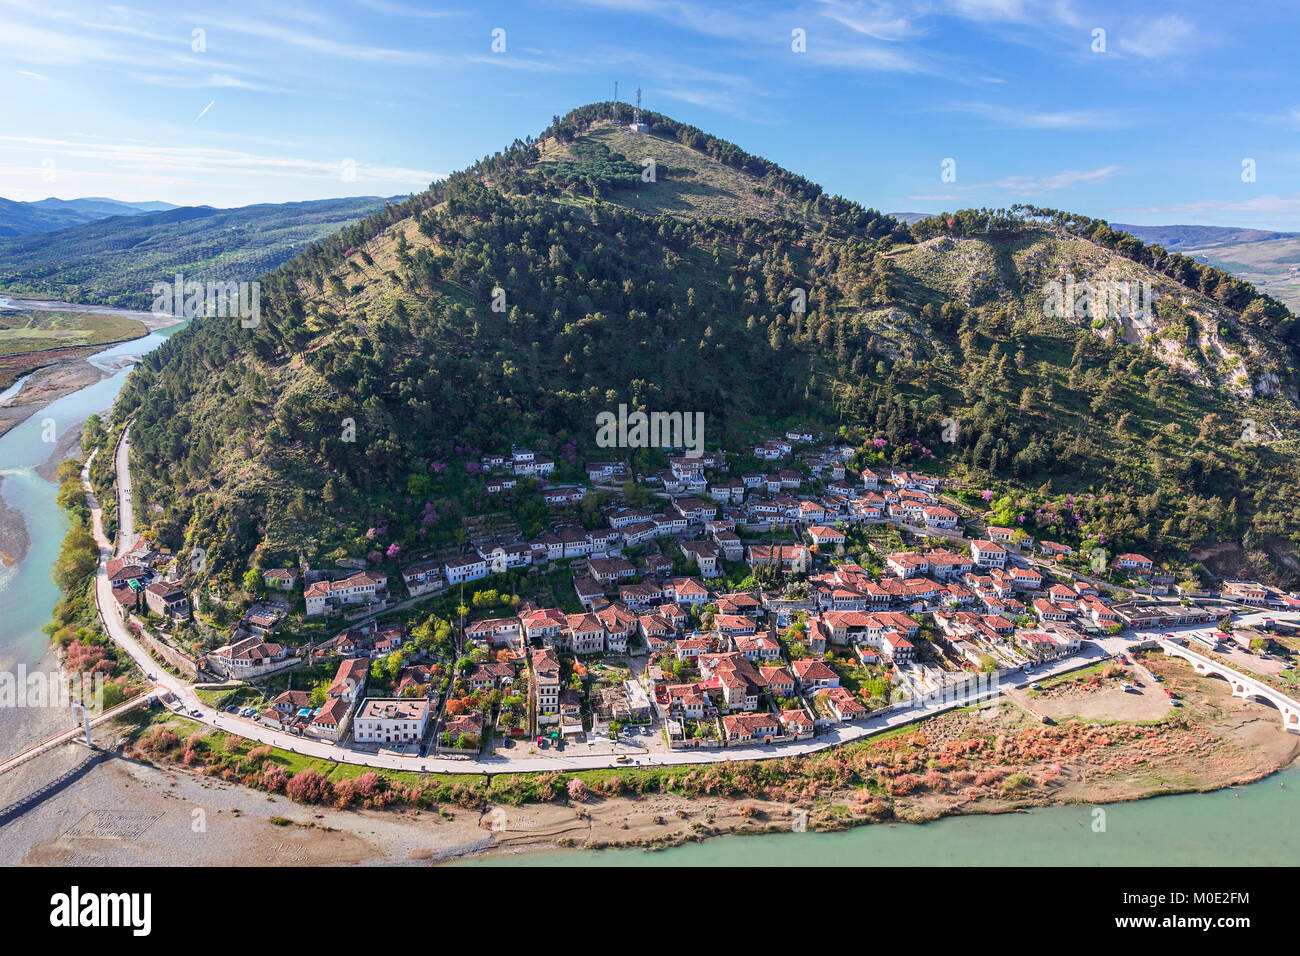 View over the traditional, oriental style old houses in Berat, Albania Stock Photo